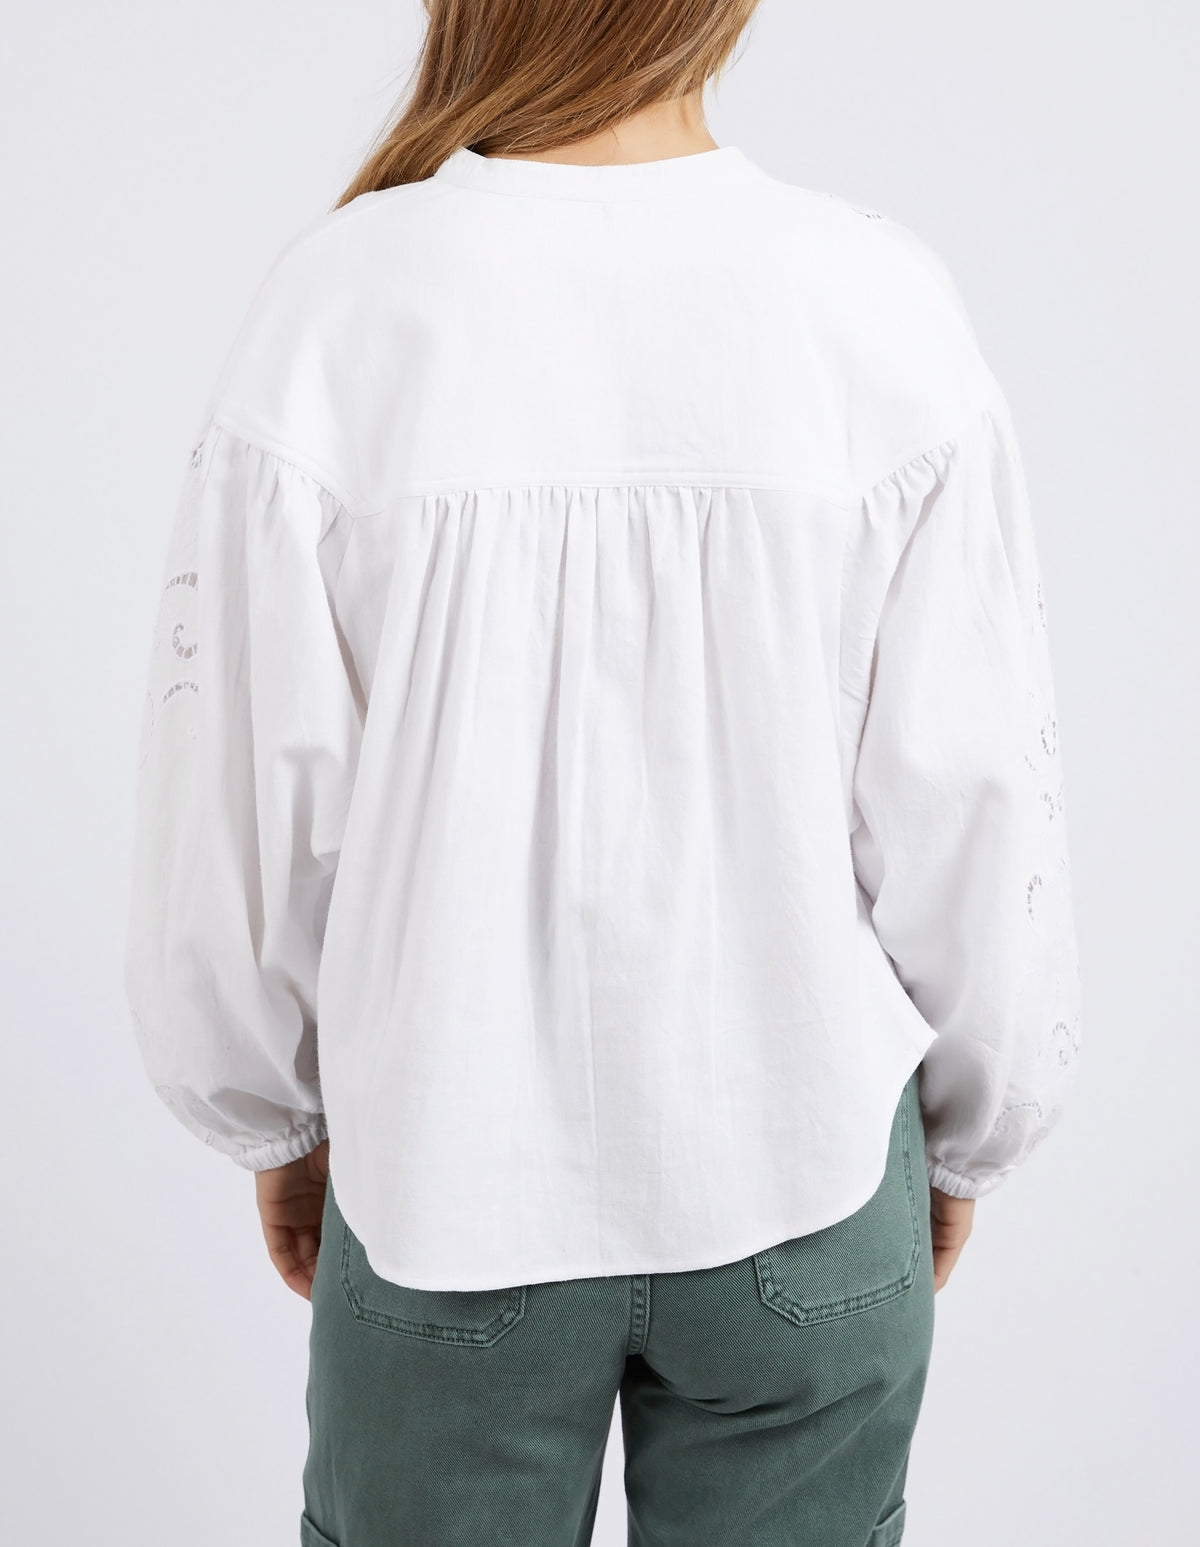 Foxwood Marlow Blouse